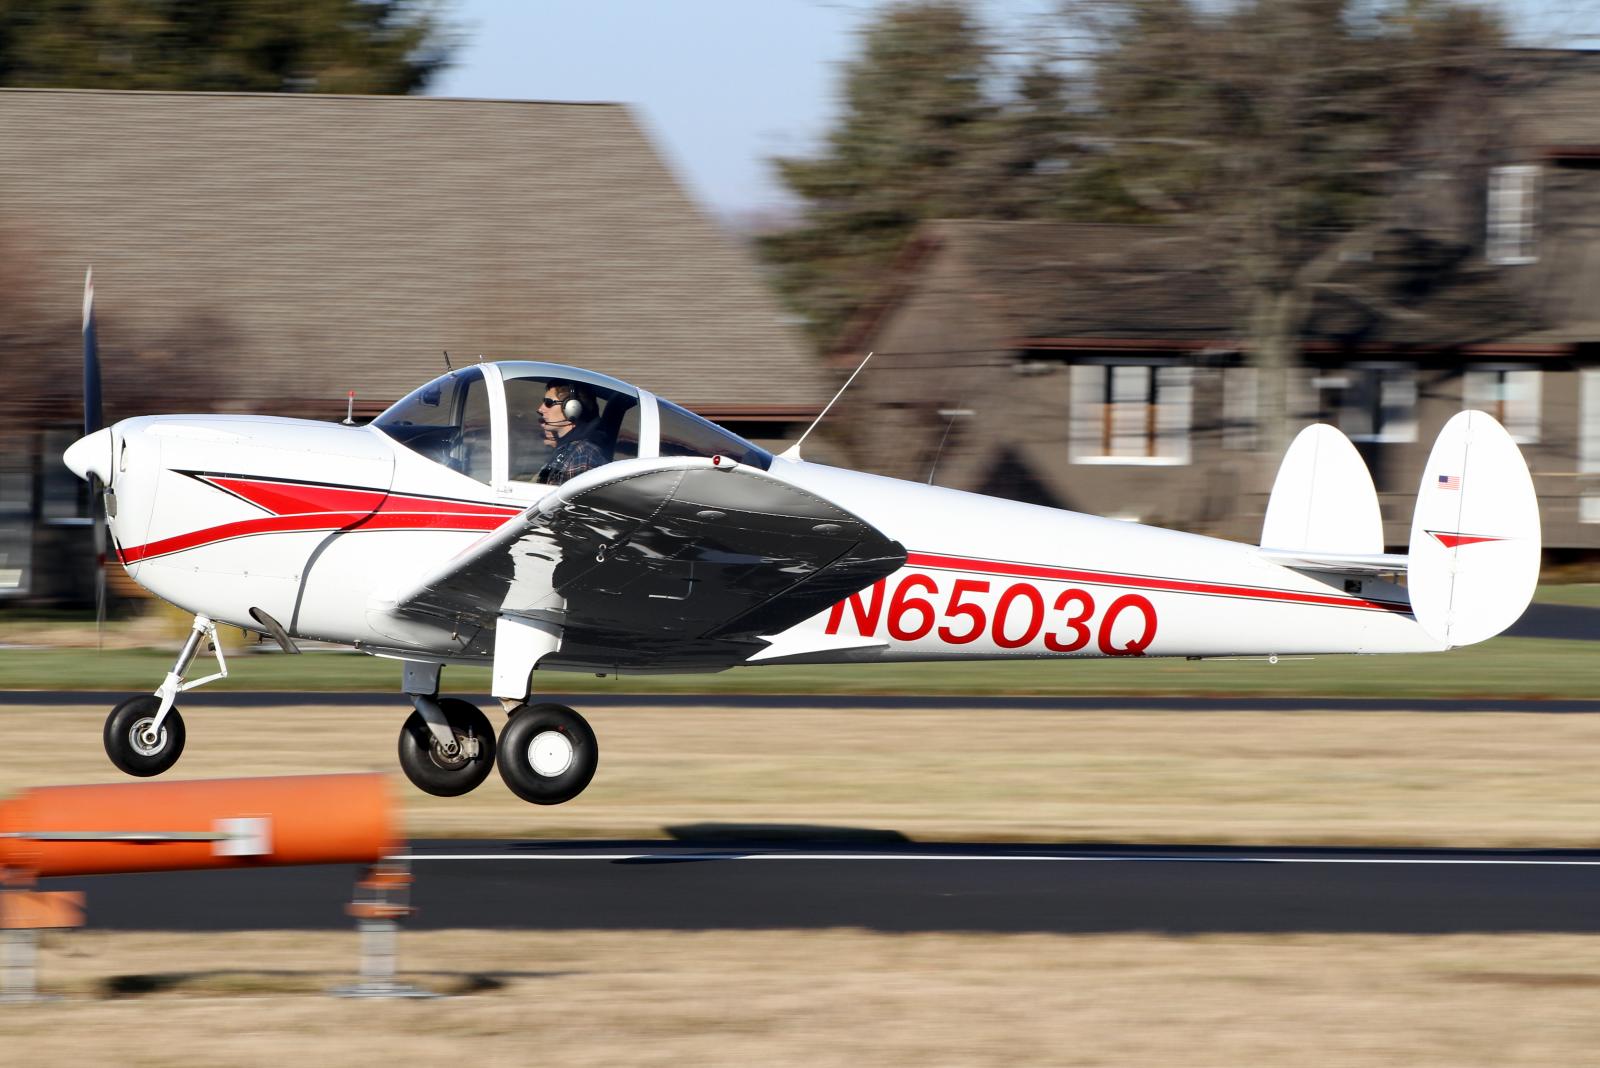 a small propeller plane taking off from a runway